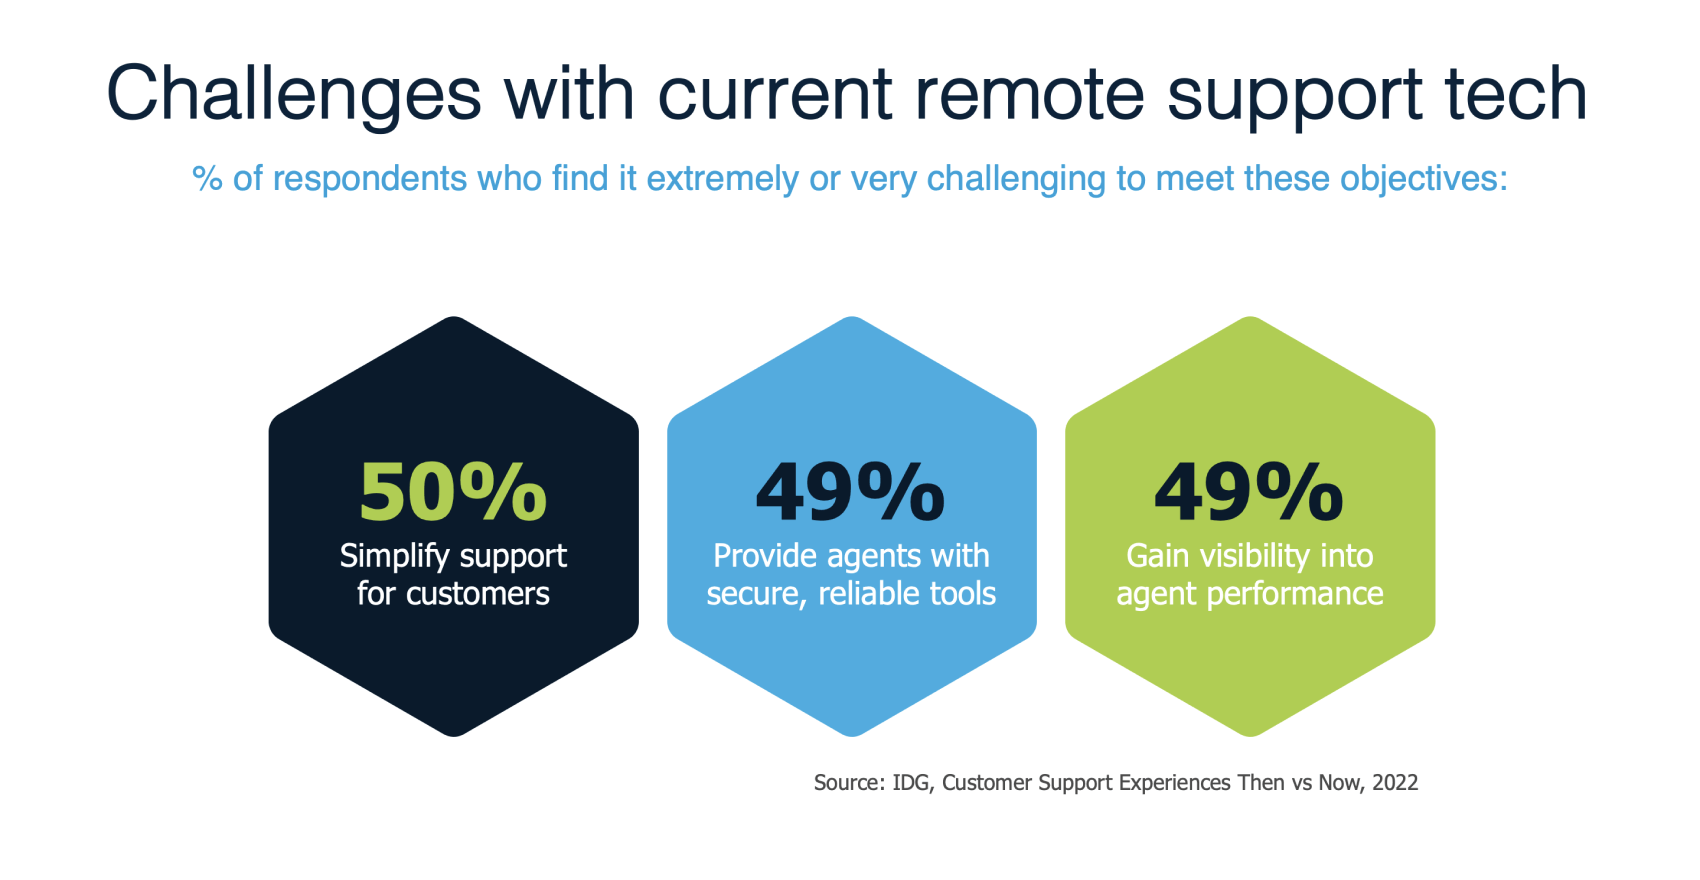 Challenges with current remote support tech: % of respondents who find it extremely or very challenging to meet these objectives: 50% simplify support for customers; 49% provide agents with secure, reliable tools; 49% gain visibility into agent performance. Source: IDG, Customer Support Experience Then vs Now, 2022.